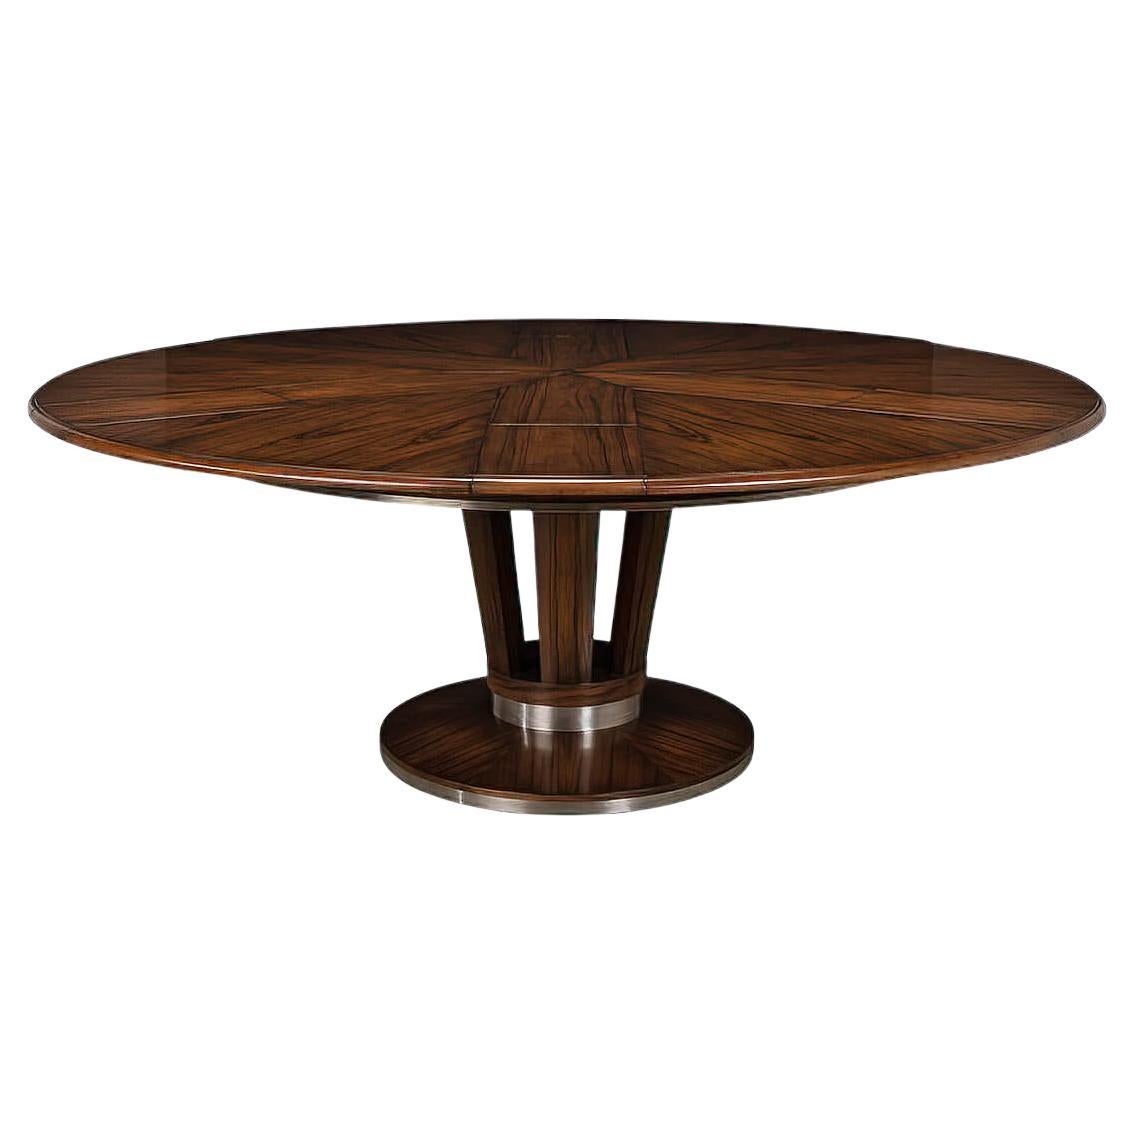 Art Deco Style Round Extending Dining Table, 84